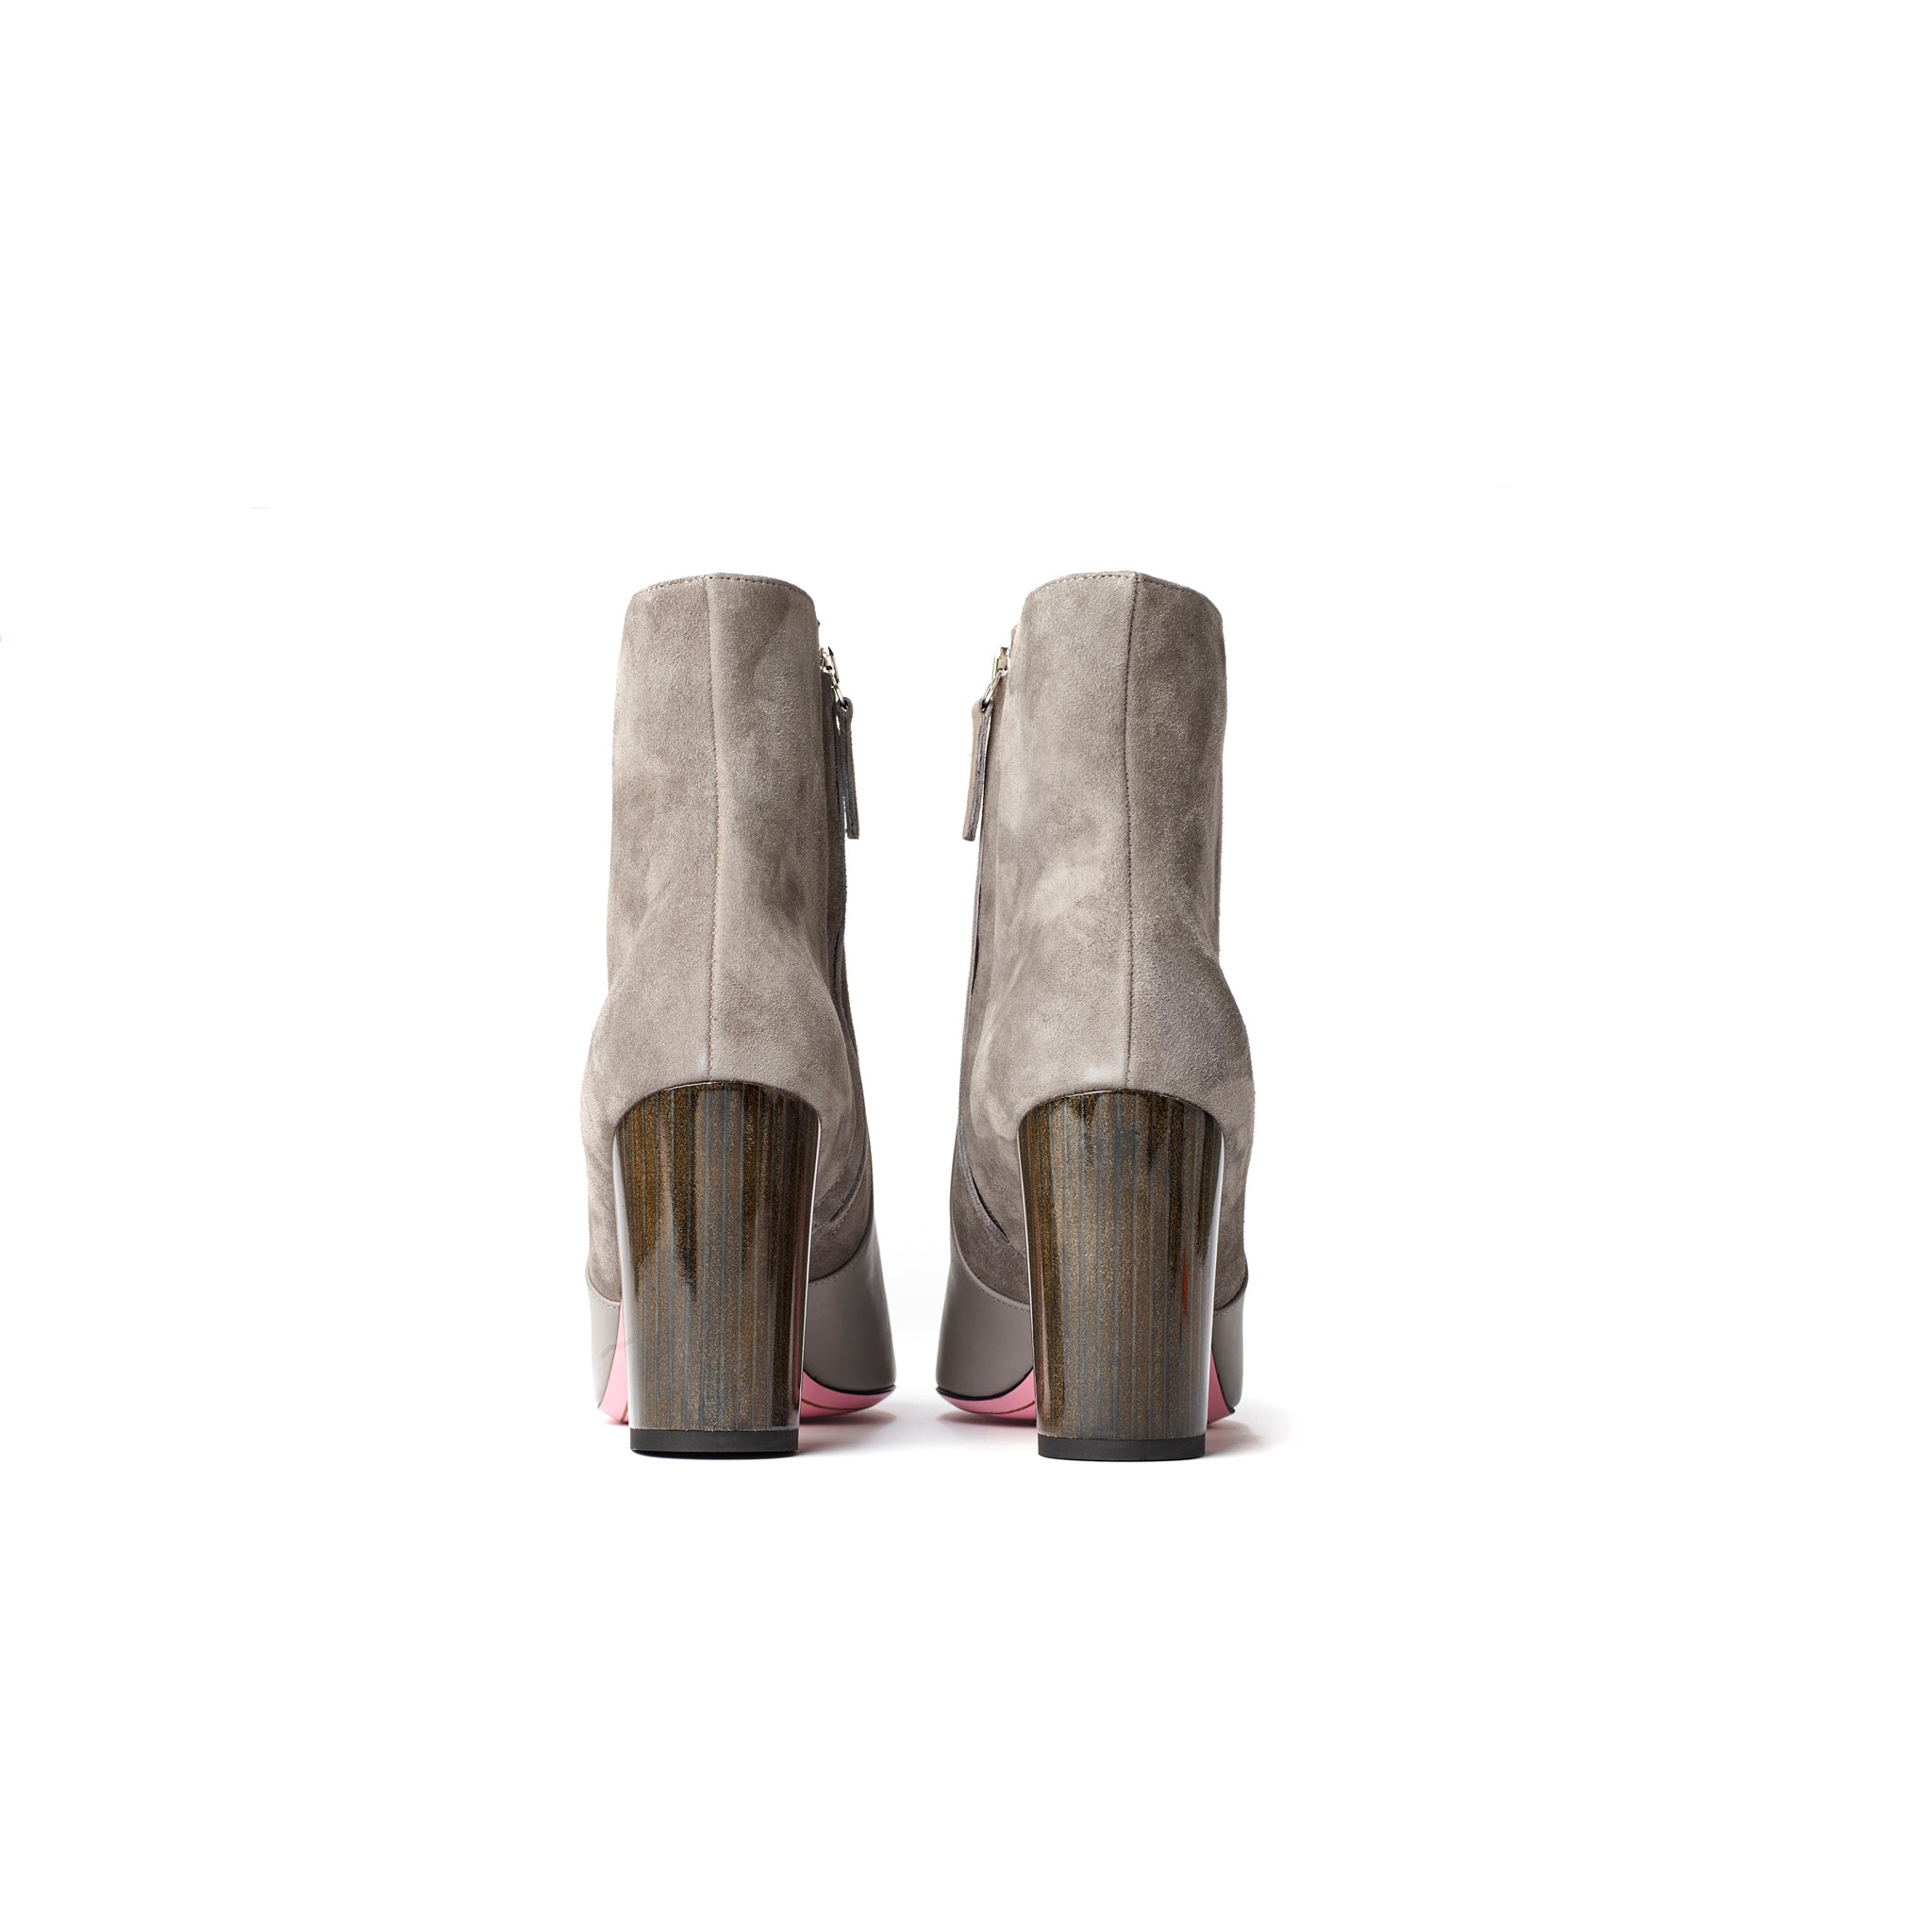 Phare Pointed block heel boot in cemento suede and leather made in Italy back view 